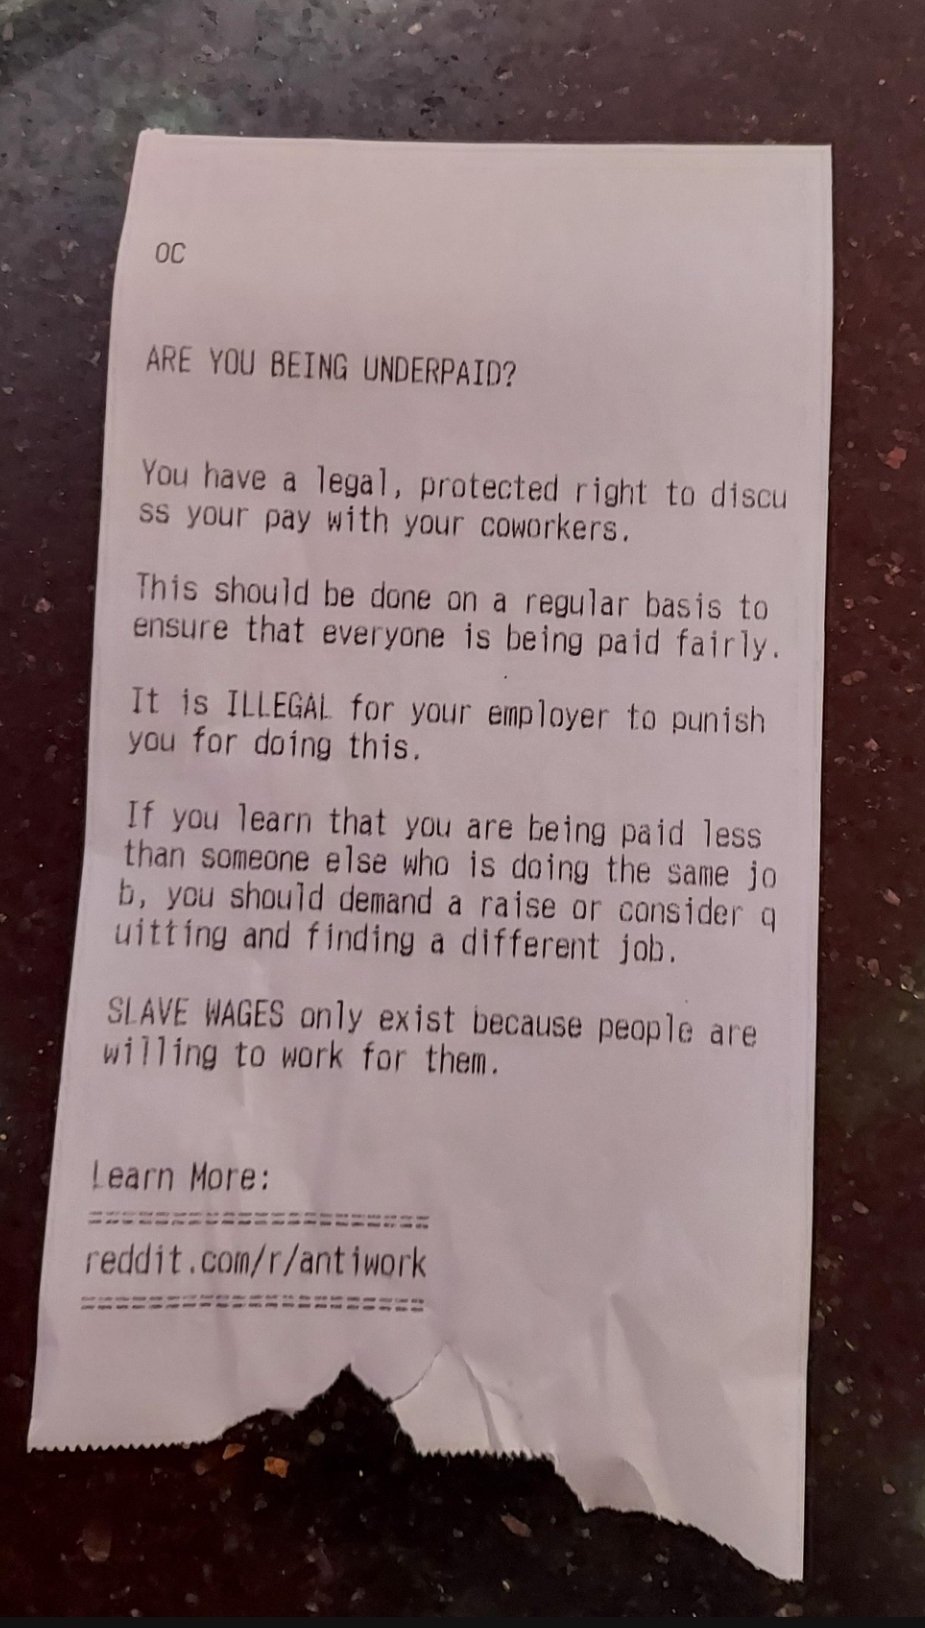 Hackers are sending receipts with anti-work messages to businesses’ printers